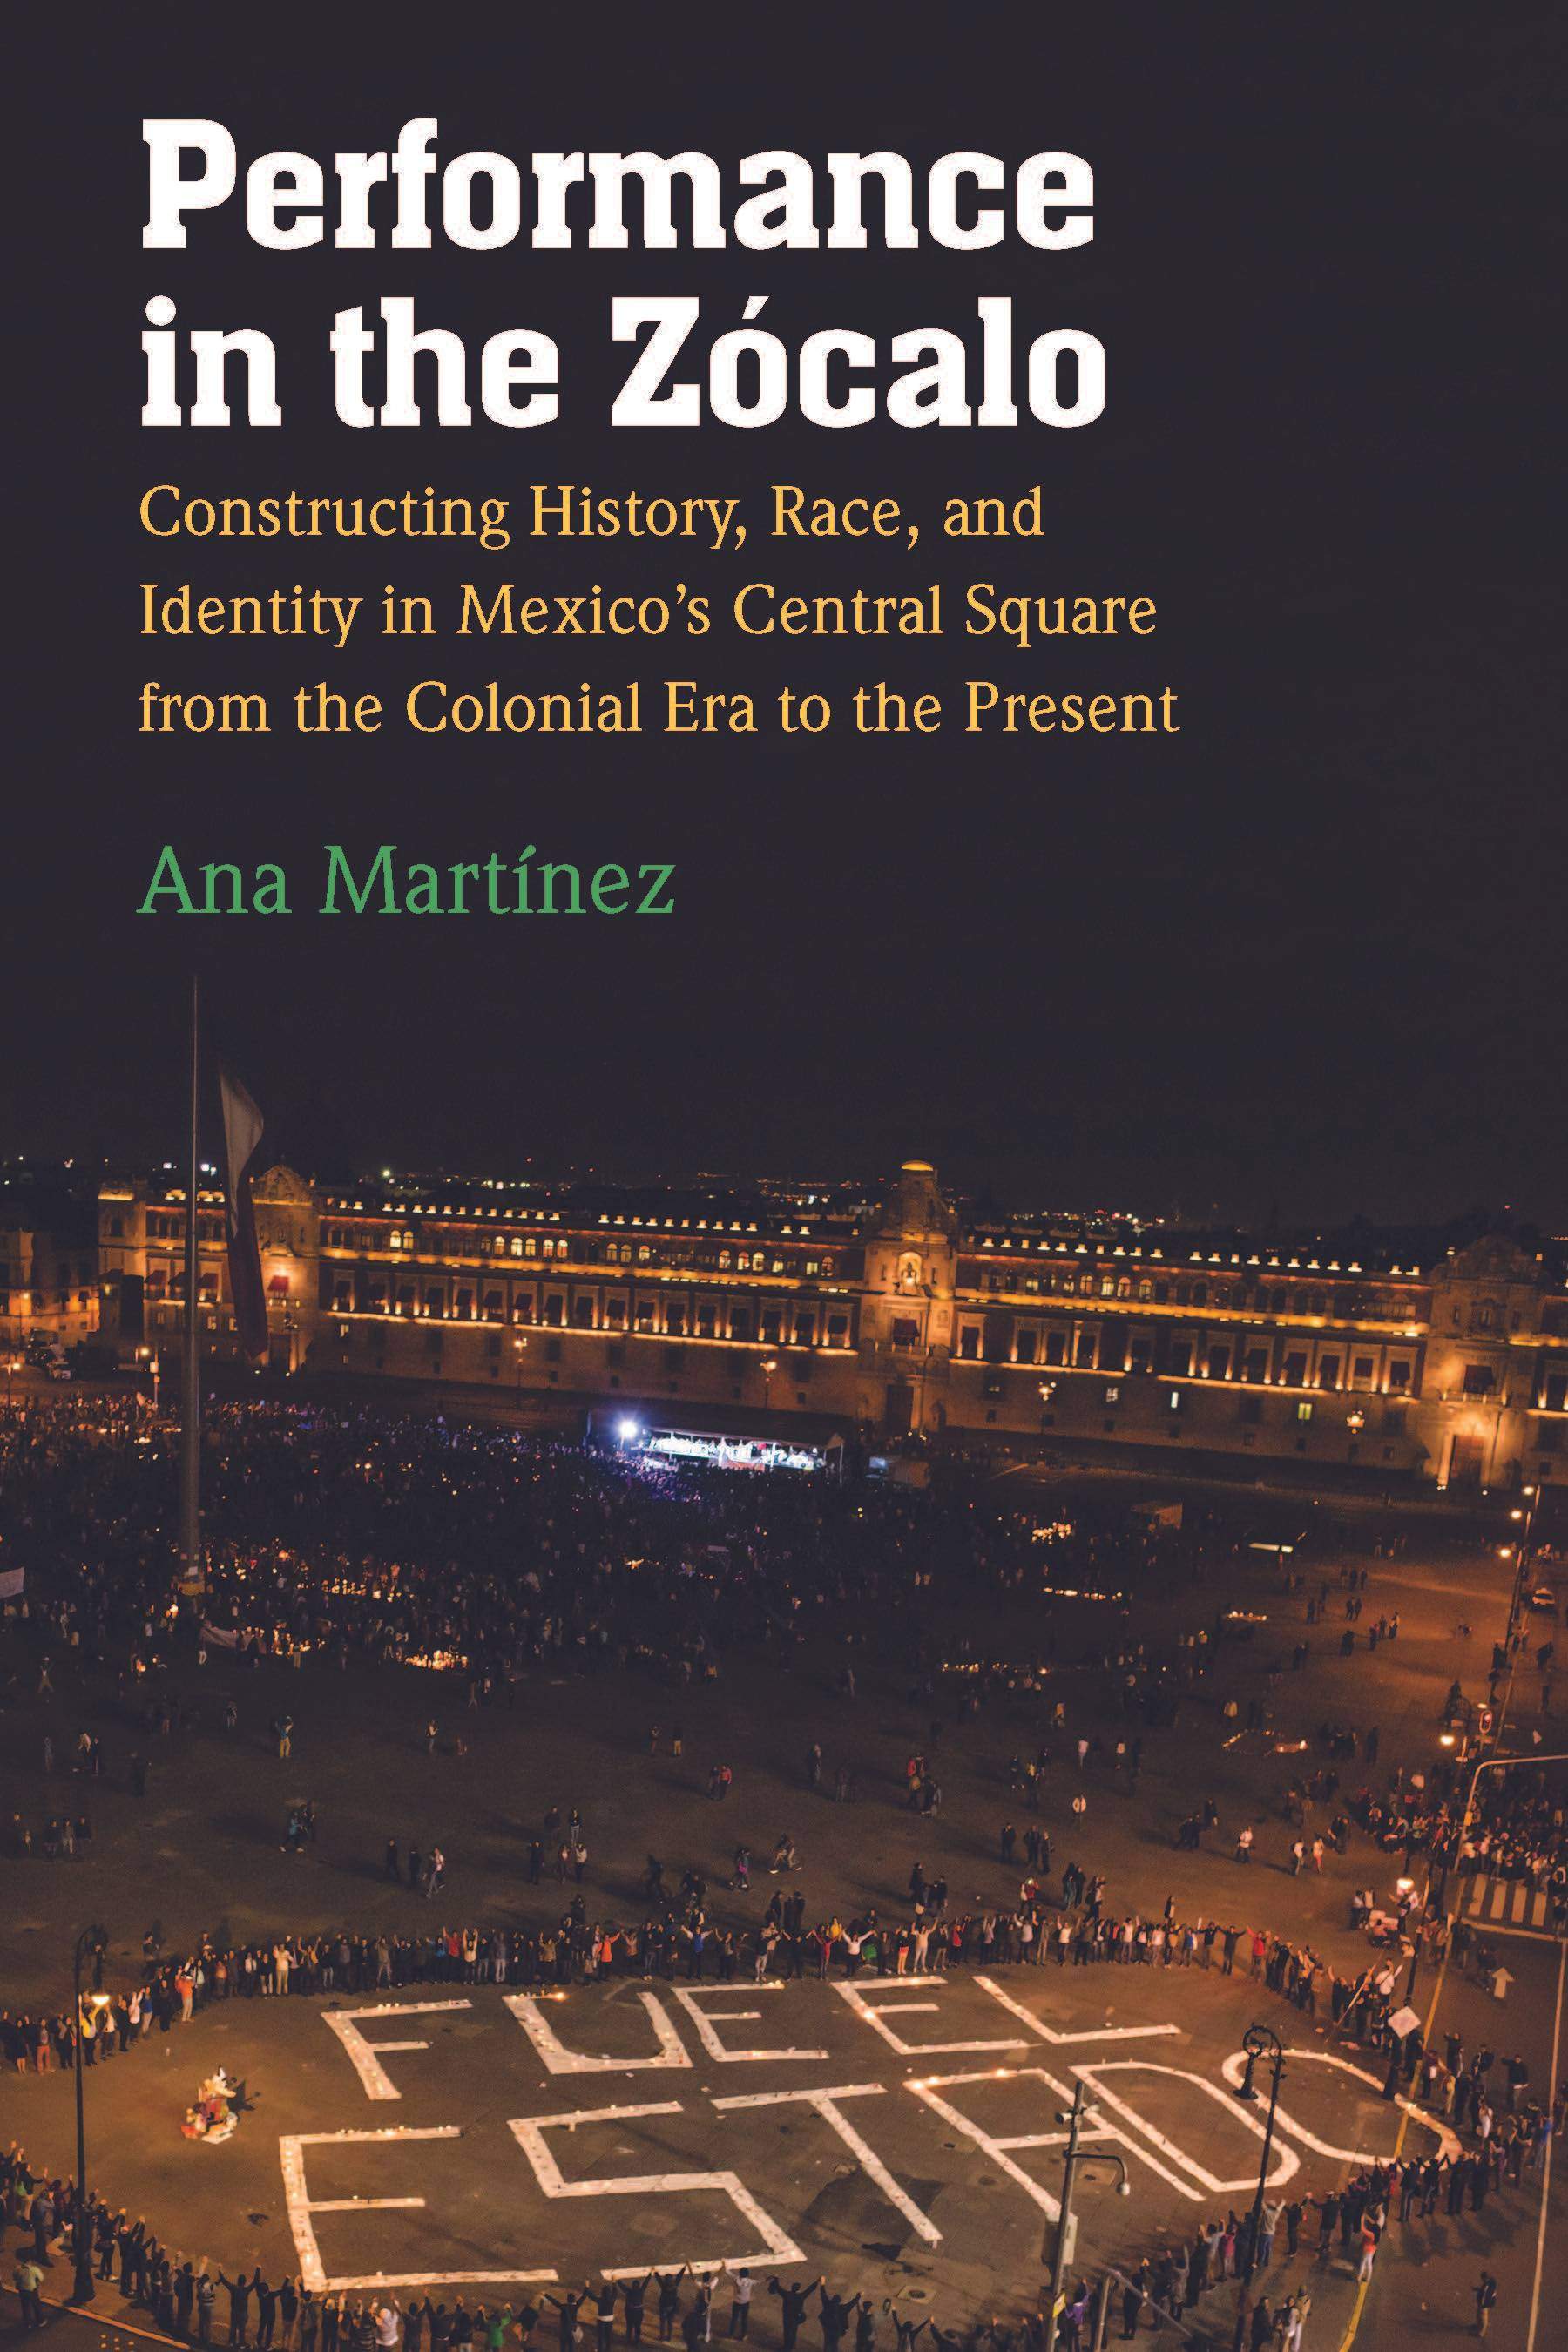 Performance in the Zócalo: Constructing History, Race, and Identity in México's Central Square from the Colonial Era to the Present (University of Michigan Press, 2020)